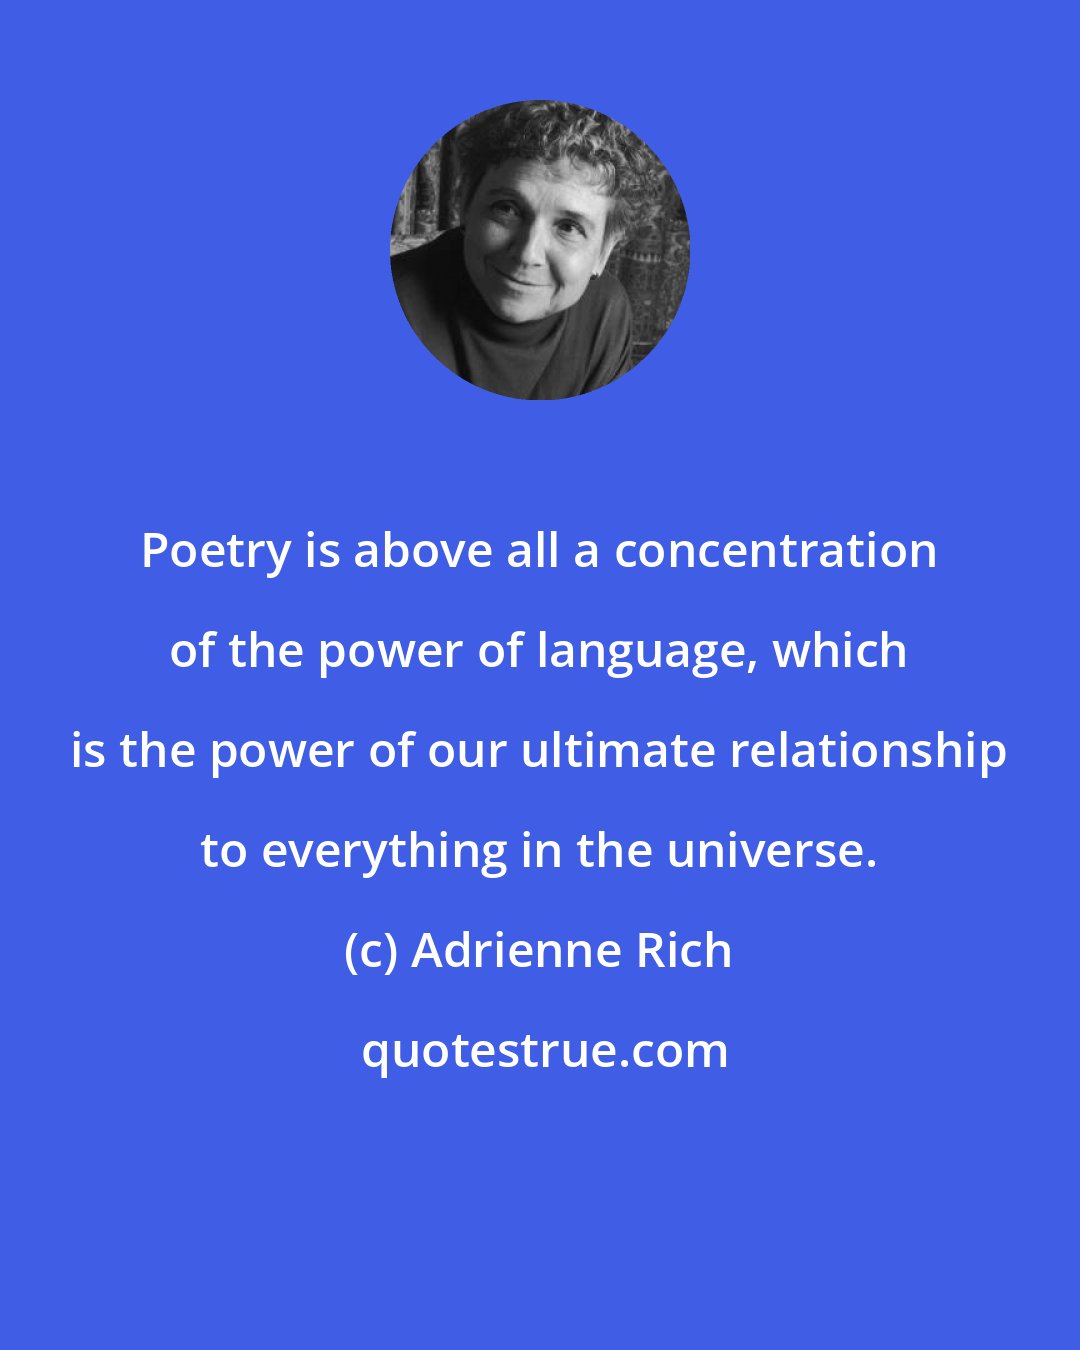 Adrienne Rich: Poetry is above all a concentration of the power of language, which is the power of our ultimate relationship to everything in the universe.